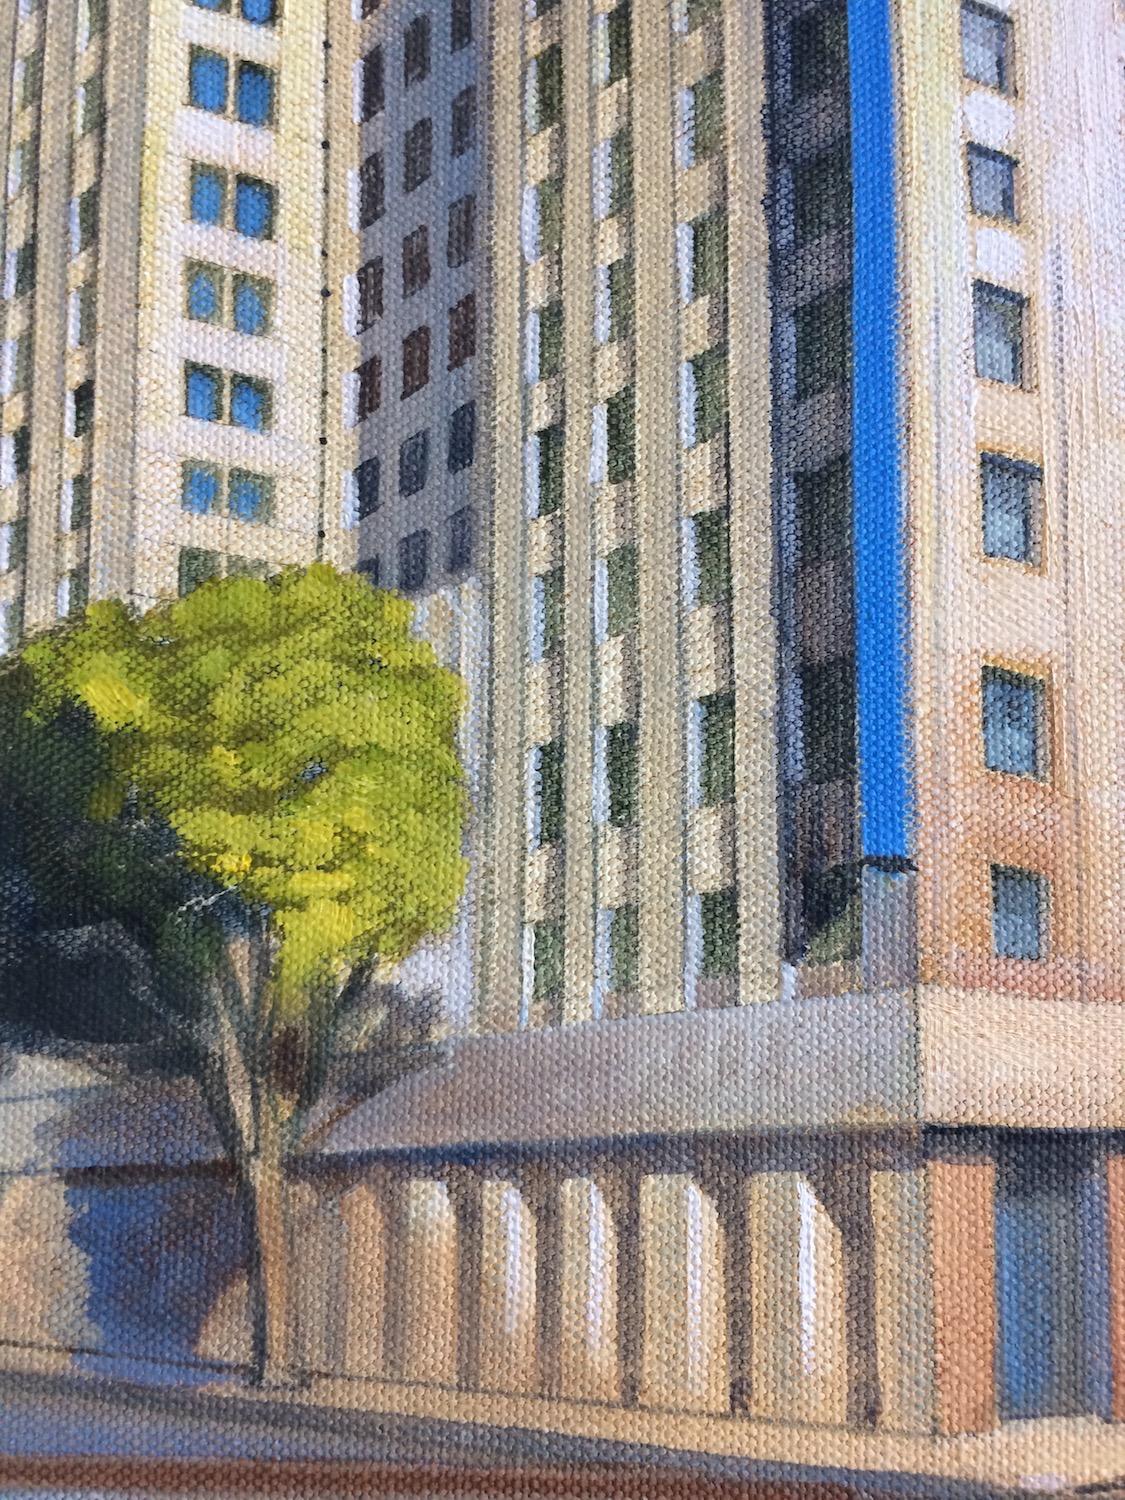 <p>Artist Comments<br />This painting exhibits a fish-eyed perspective of downtown Los Angeles.  The panoramic view encompasses the eclectic mix of architectural styles and eras that define the city as a work in progress in their hard juxtaposition.